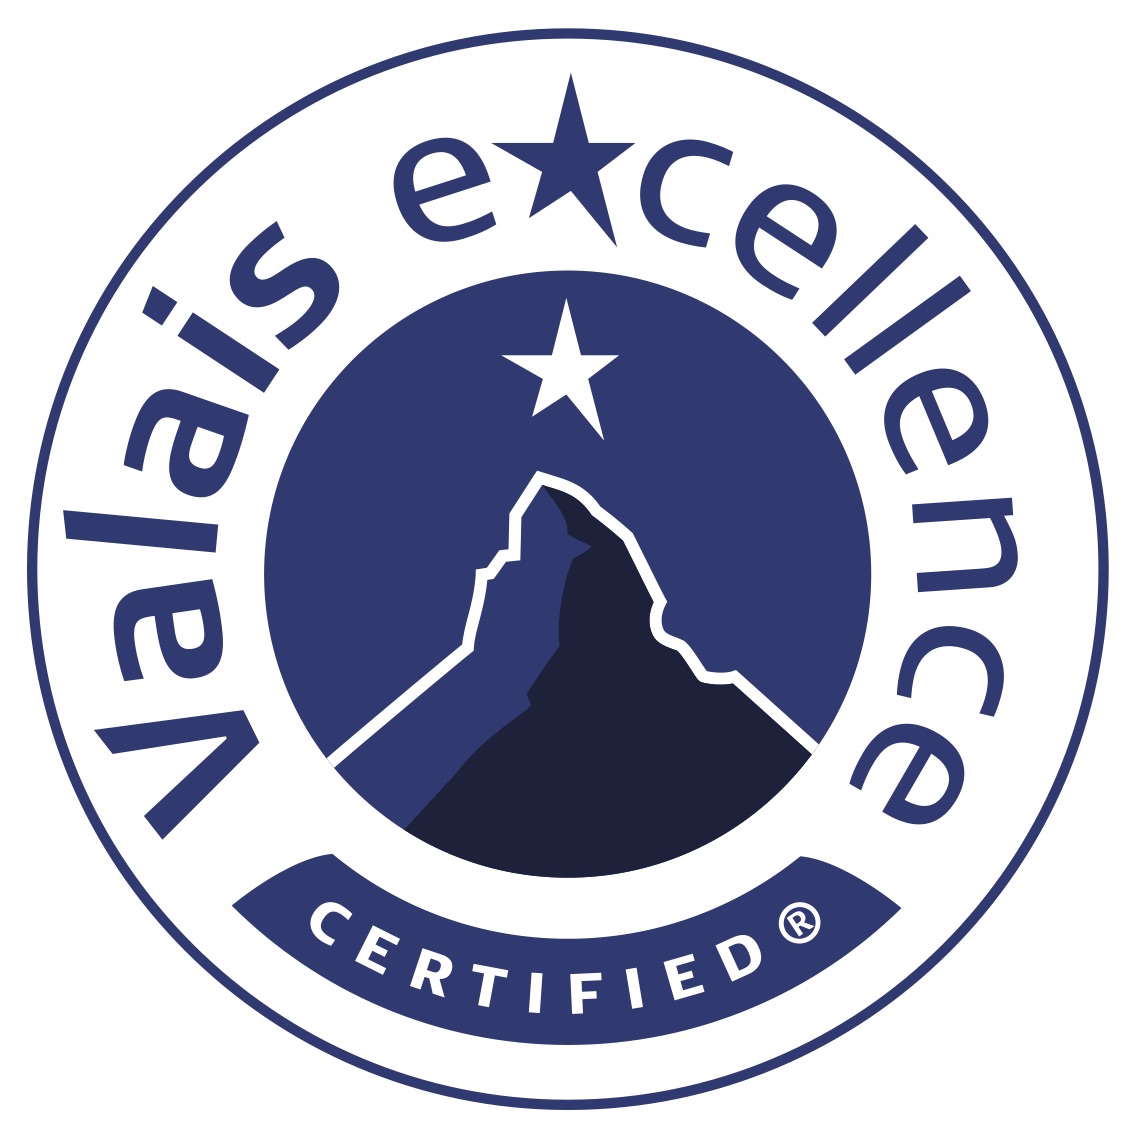 http://www.valais-excellence.ch/fr/